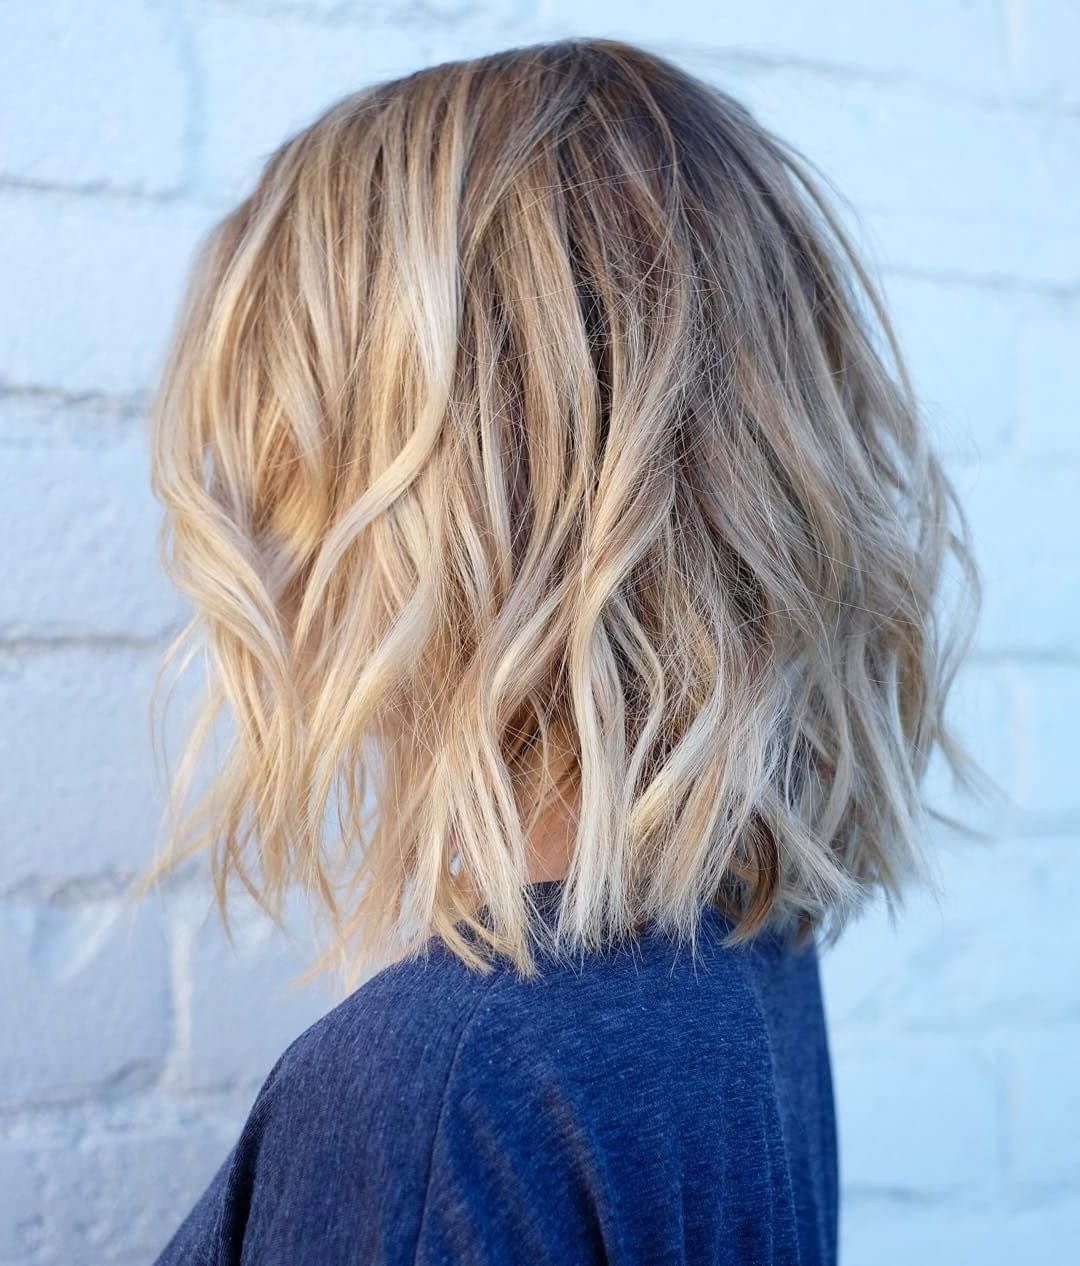 50 Fresh Short Blonde Hair Ideas To Update Your Style In 2018 Within Popular Sleek Ash Blonde Hairstyles (Gallery 15 of 20)